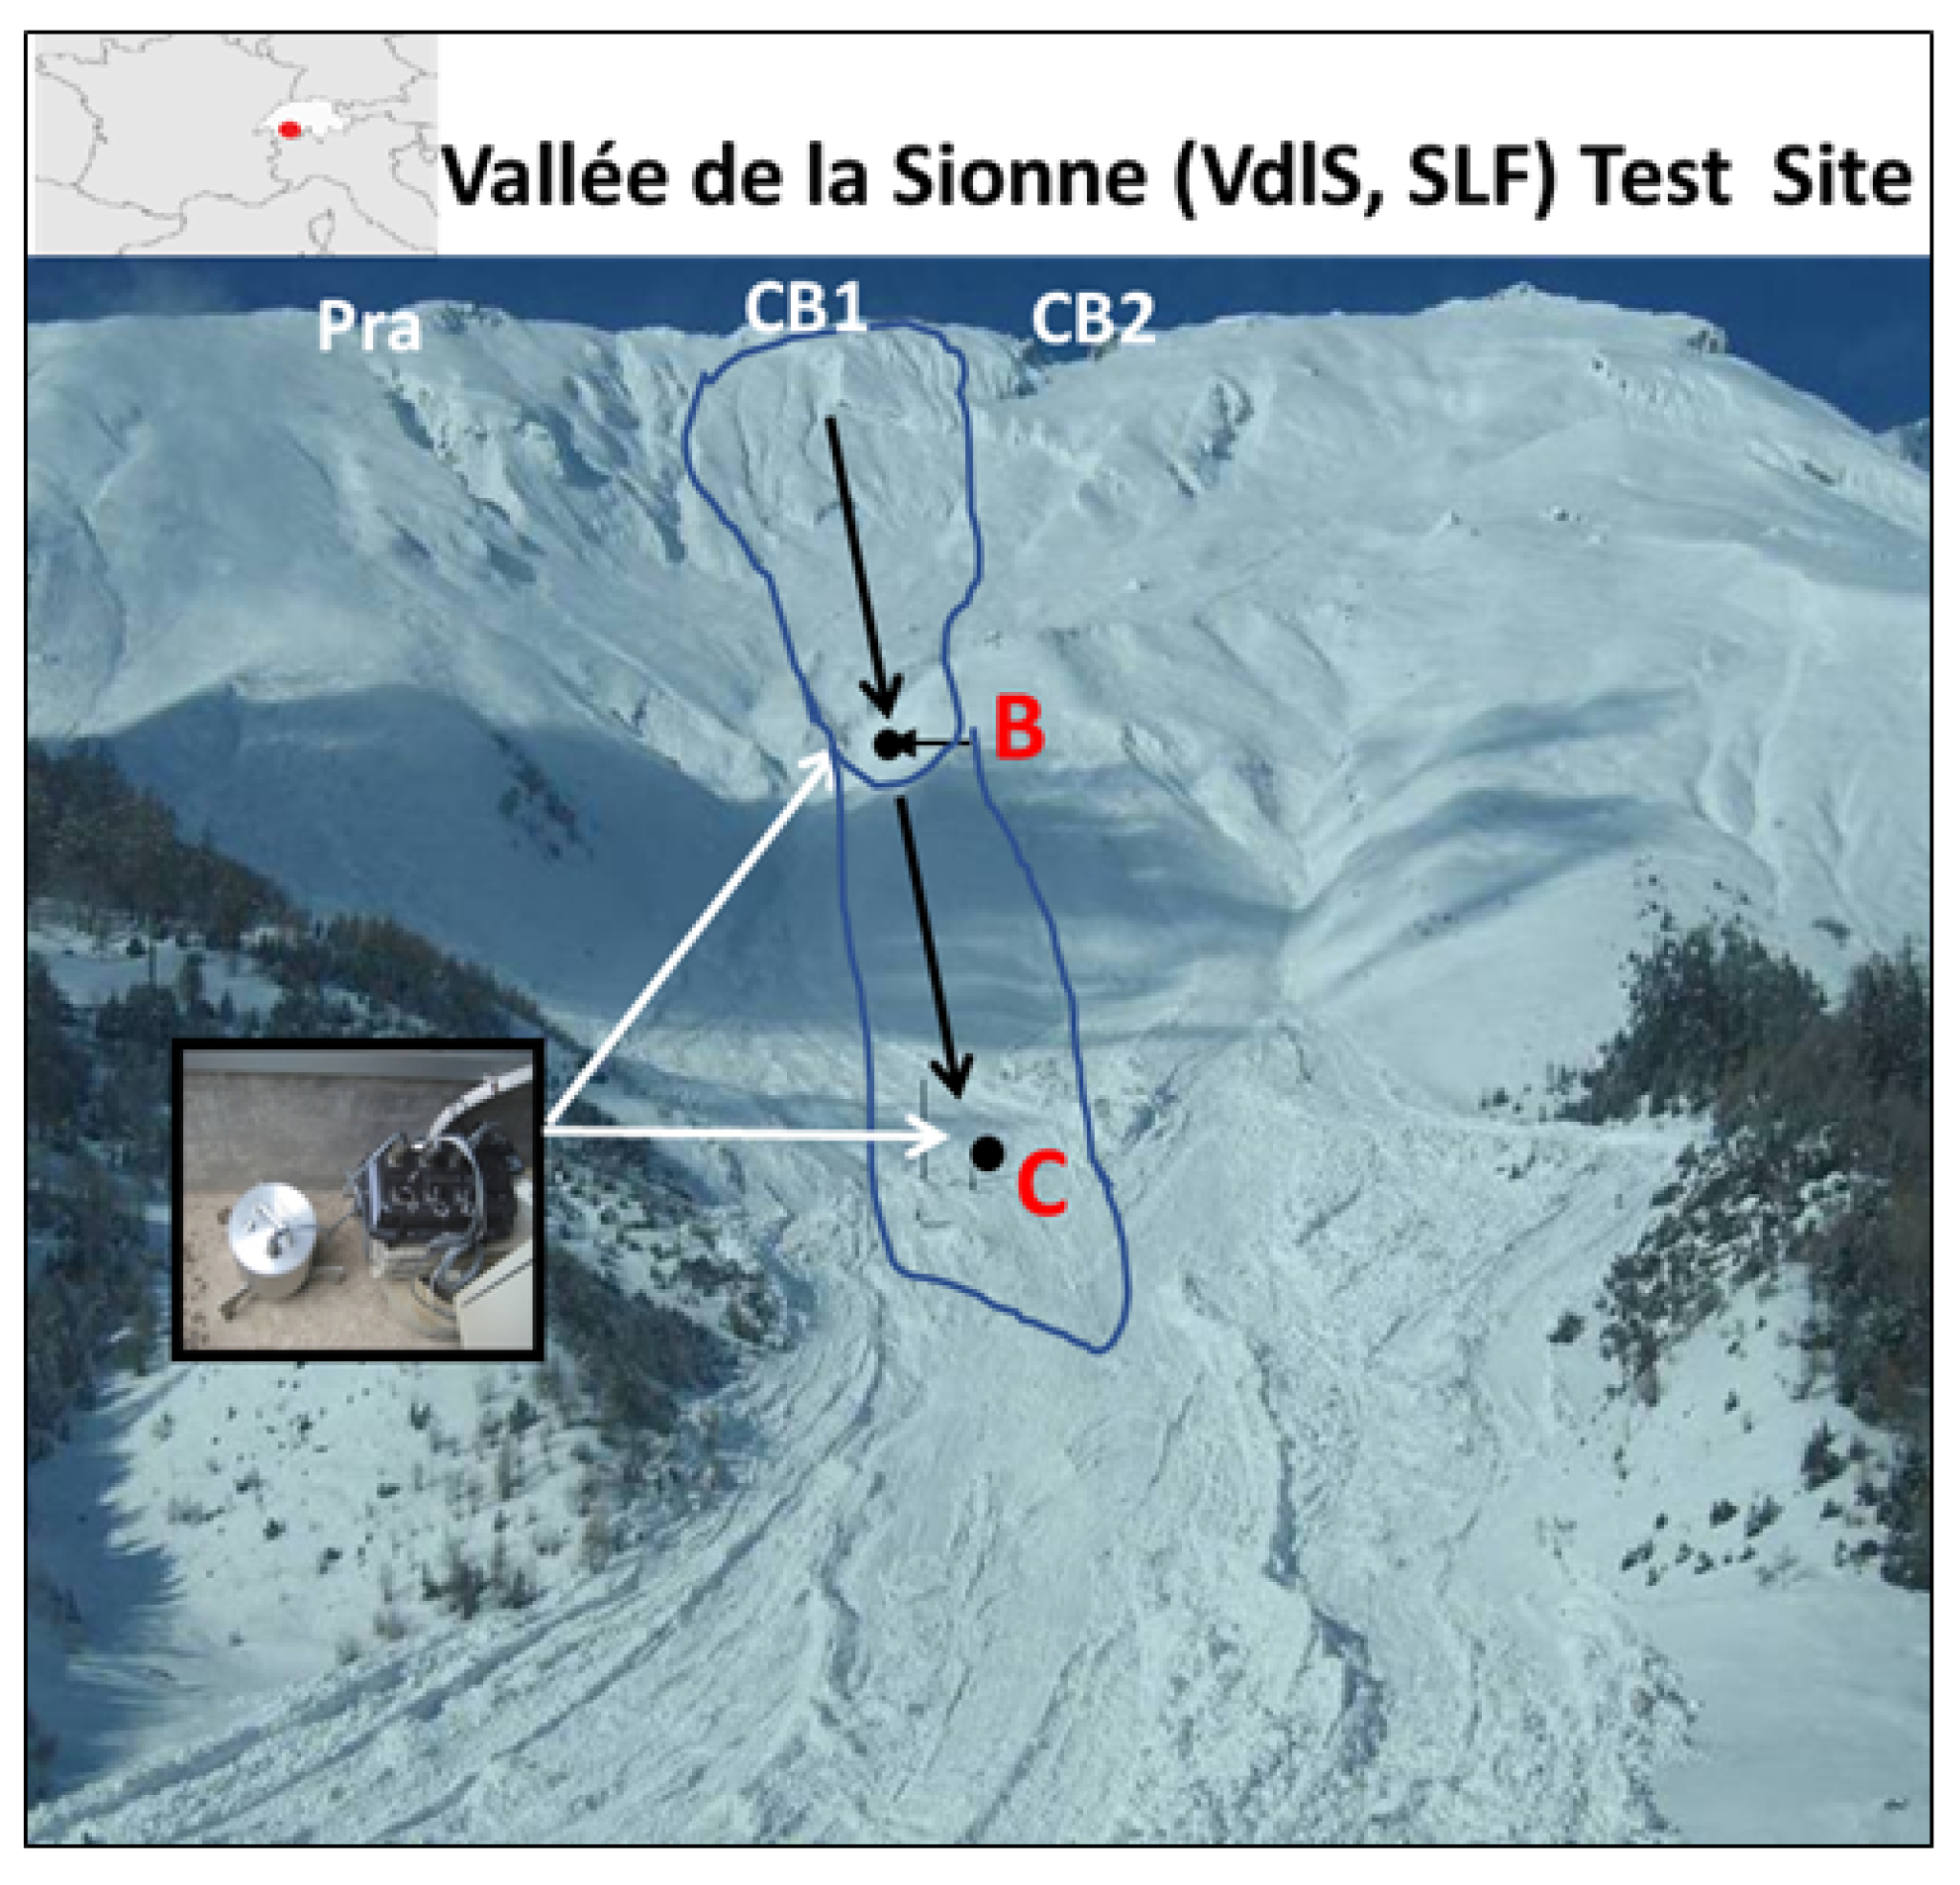 Geosciences | Free Full-Text | Estimation of Avalanche Development and  Frontal Velocities Based on the Spectrogram of the Seismic Signals  Generated at the Vallée de la Sionne Test Site